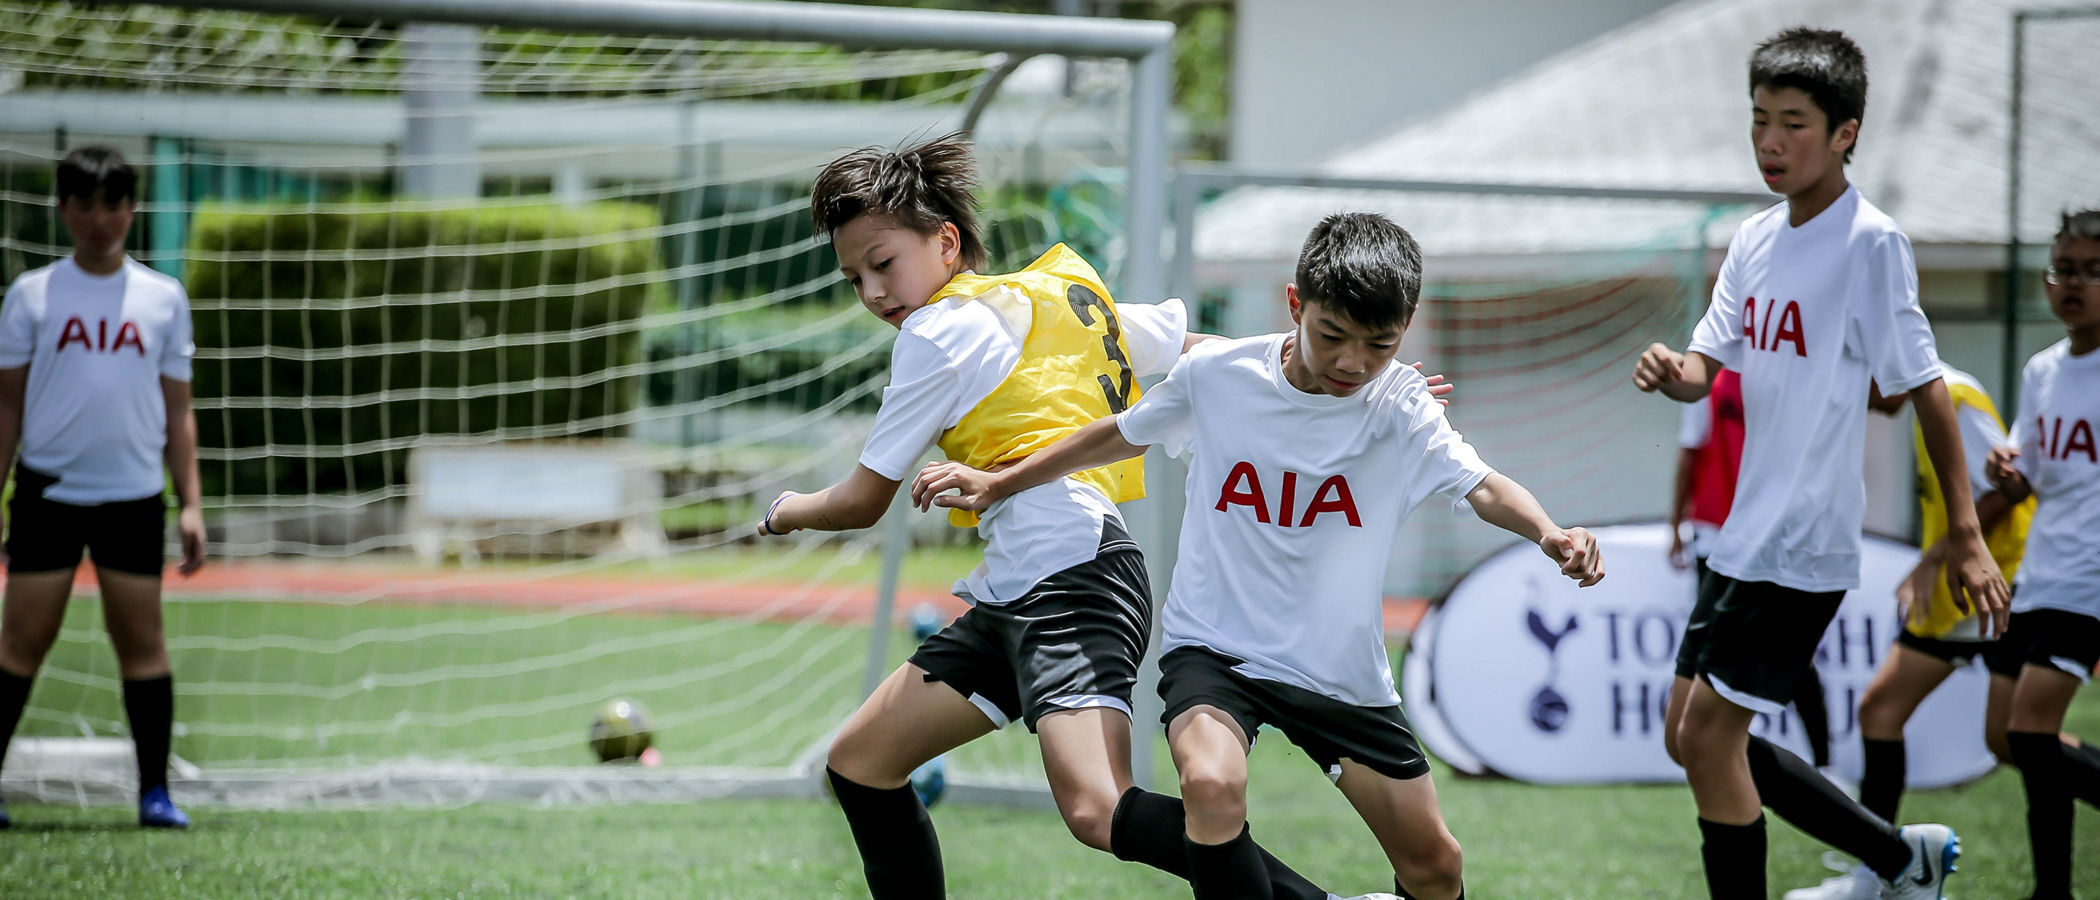 Skills and drills with the Spurs Global Development